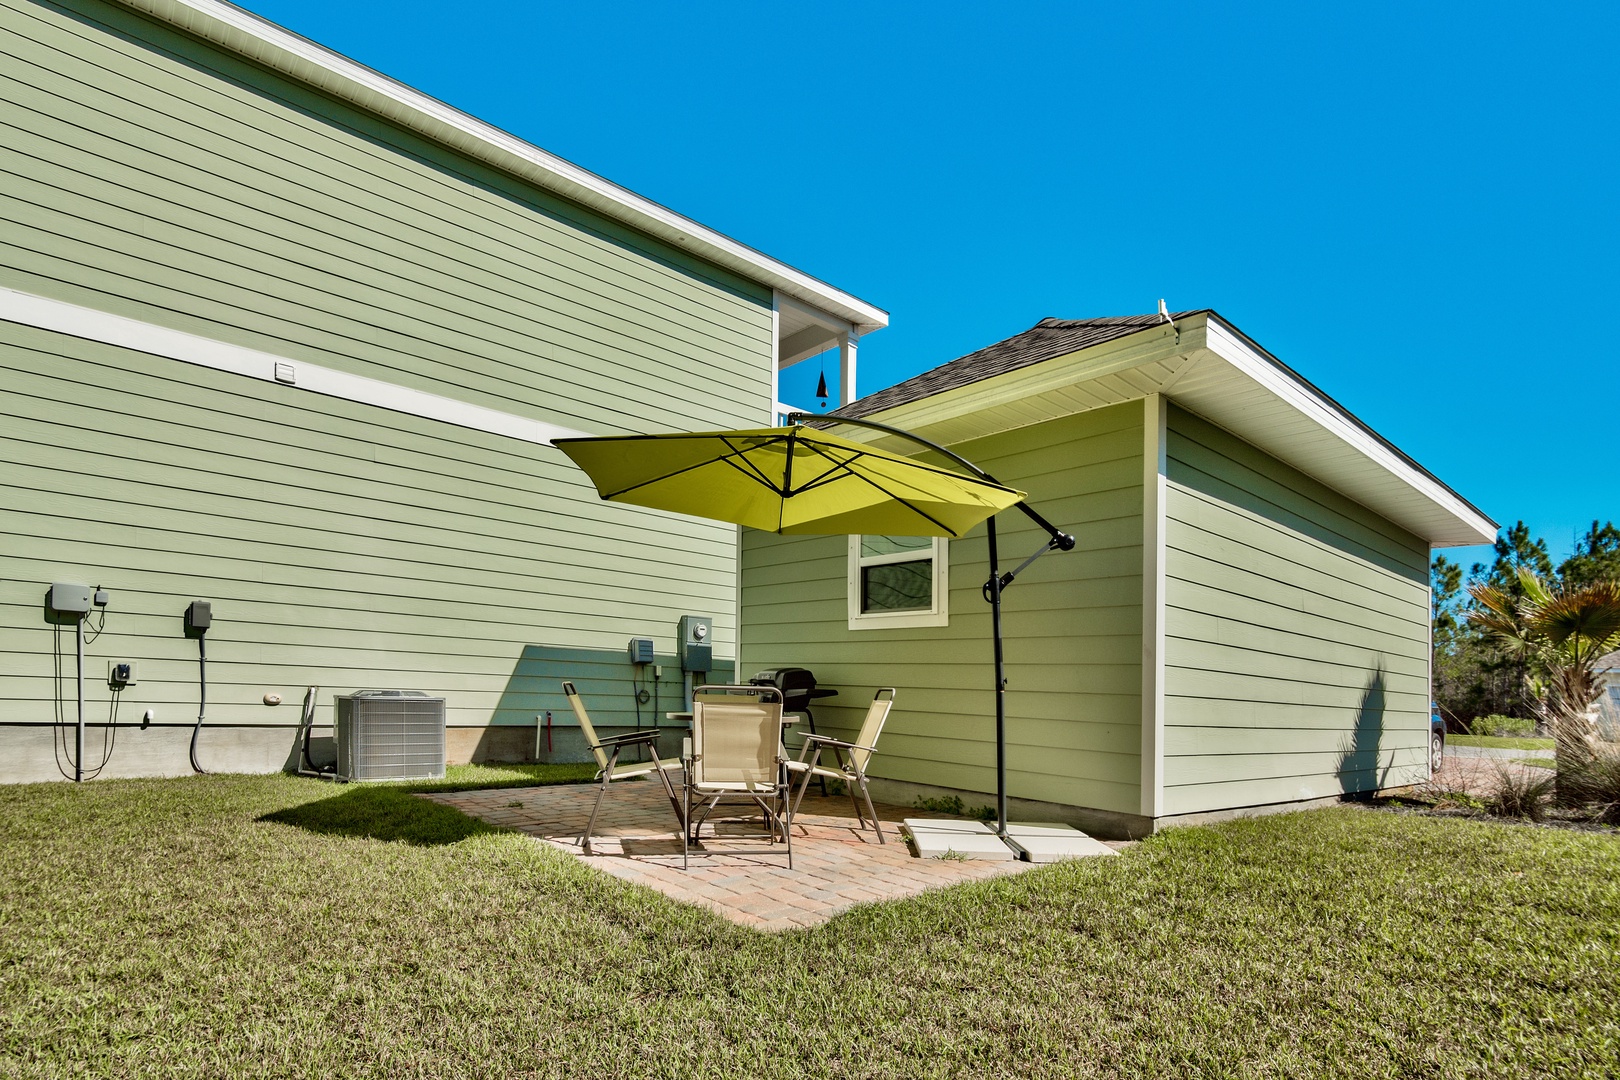 The backyard offers shade and a gas barbeque grill!